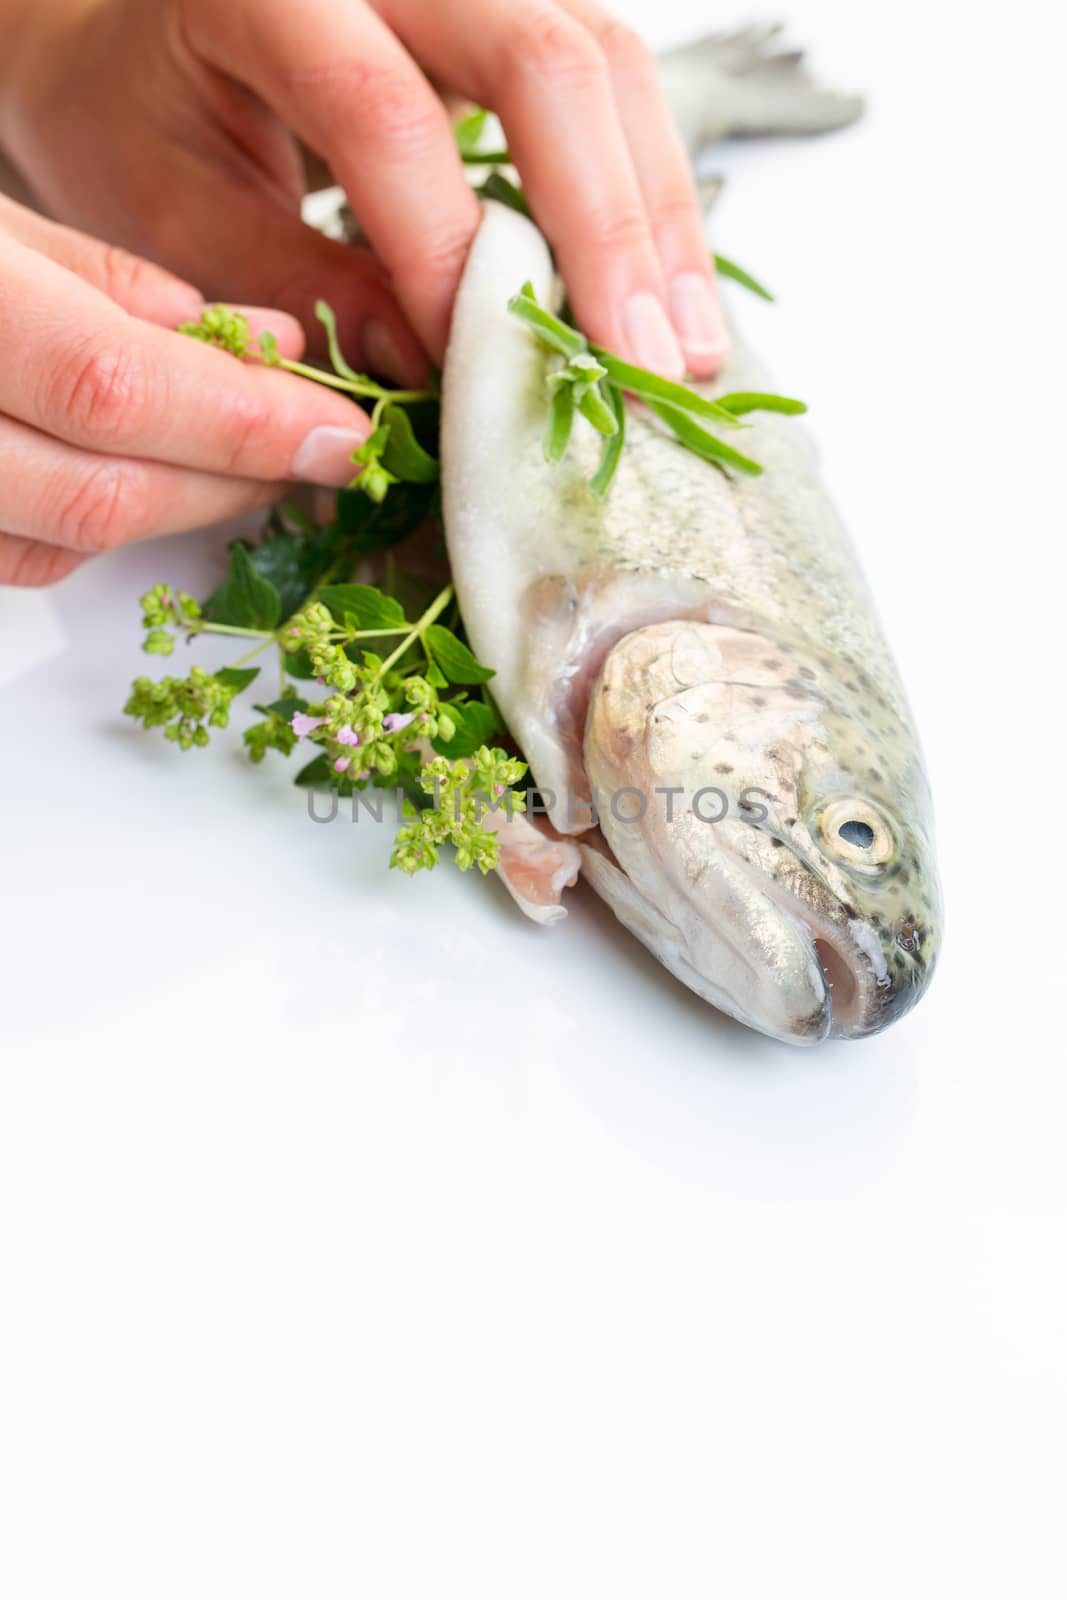 Female chef's hands stuffing a freshly cought trout with fresh herbs